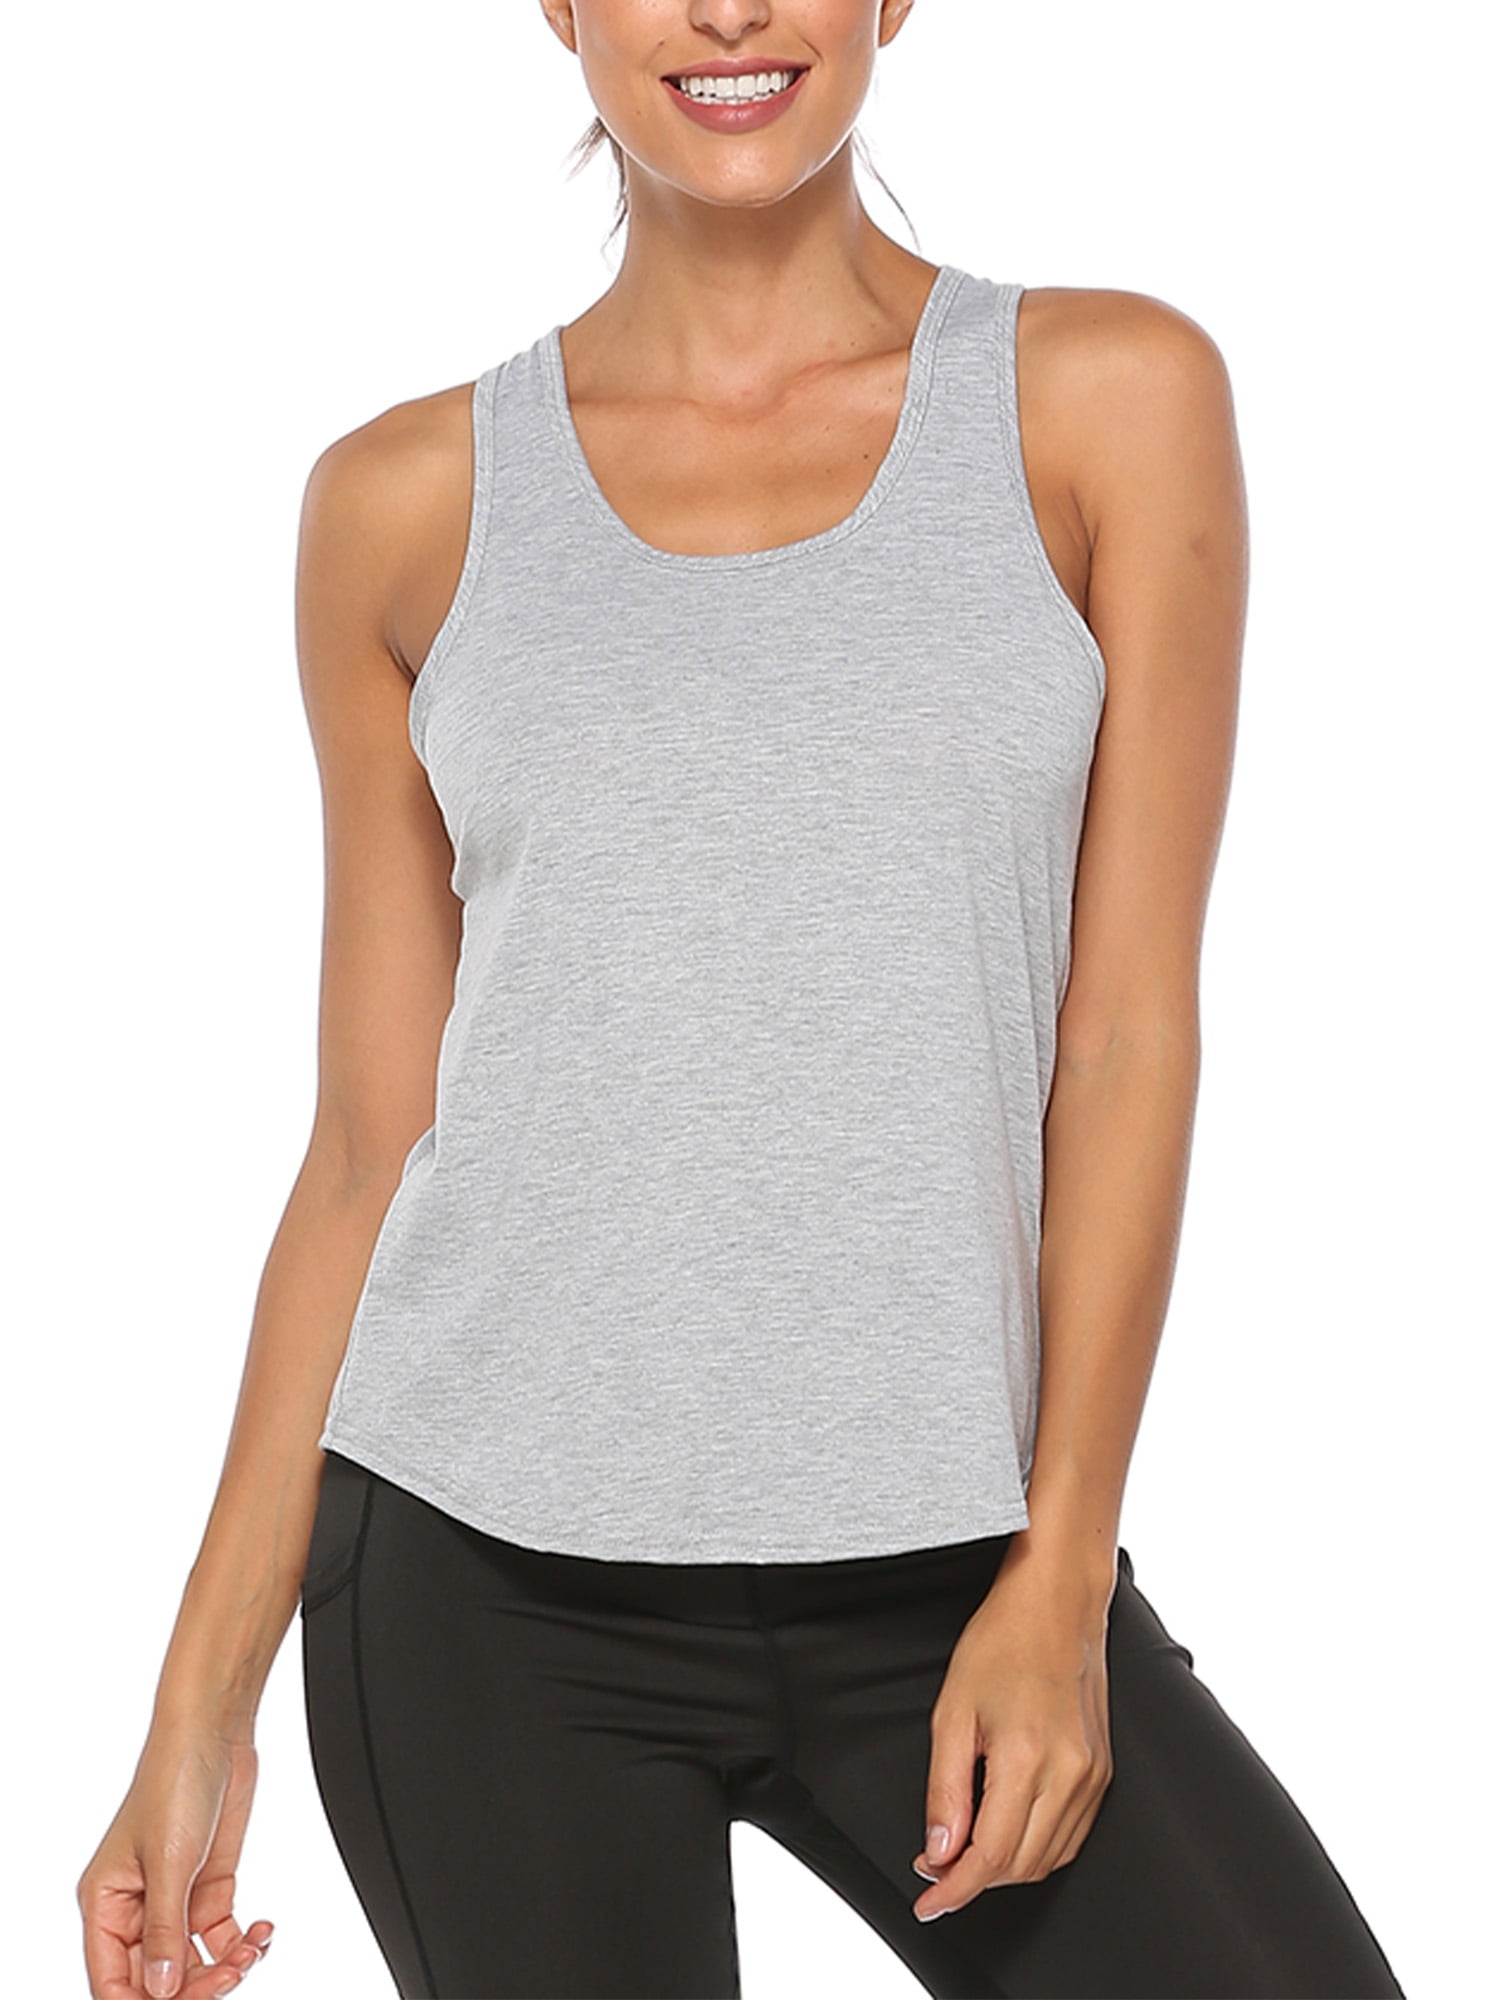 Workout Racerback Tank Tops for Women Loose Fit Flowy Yoga Running Gym Muscle Athletic Tank Top